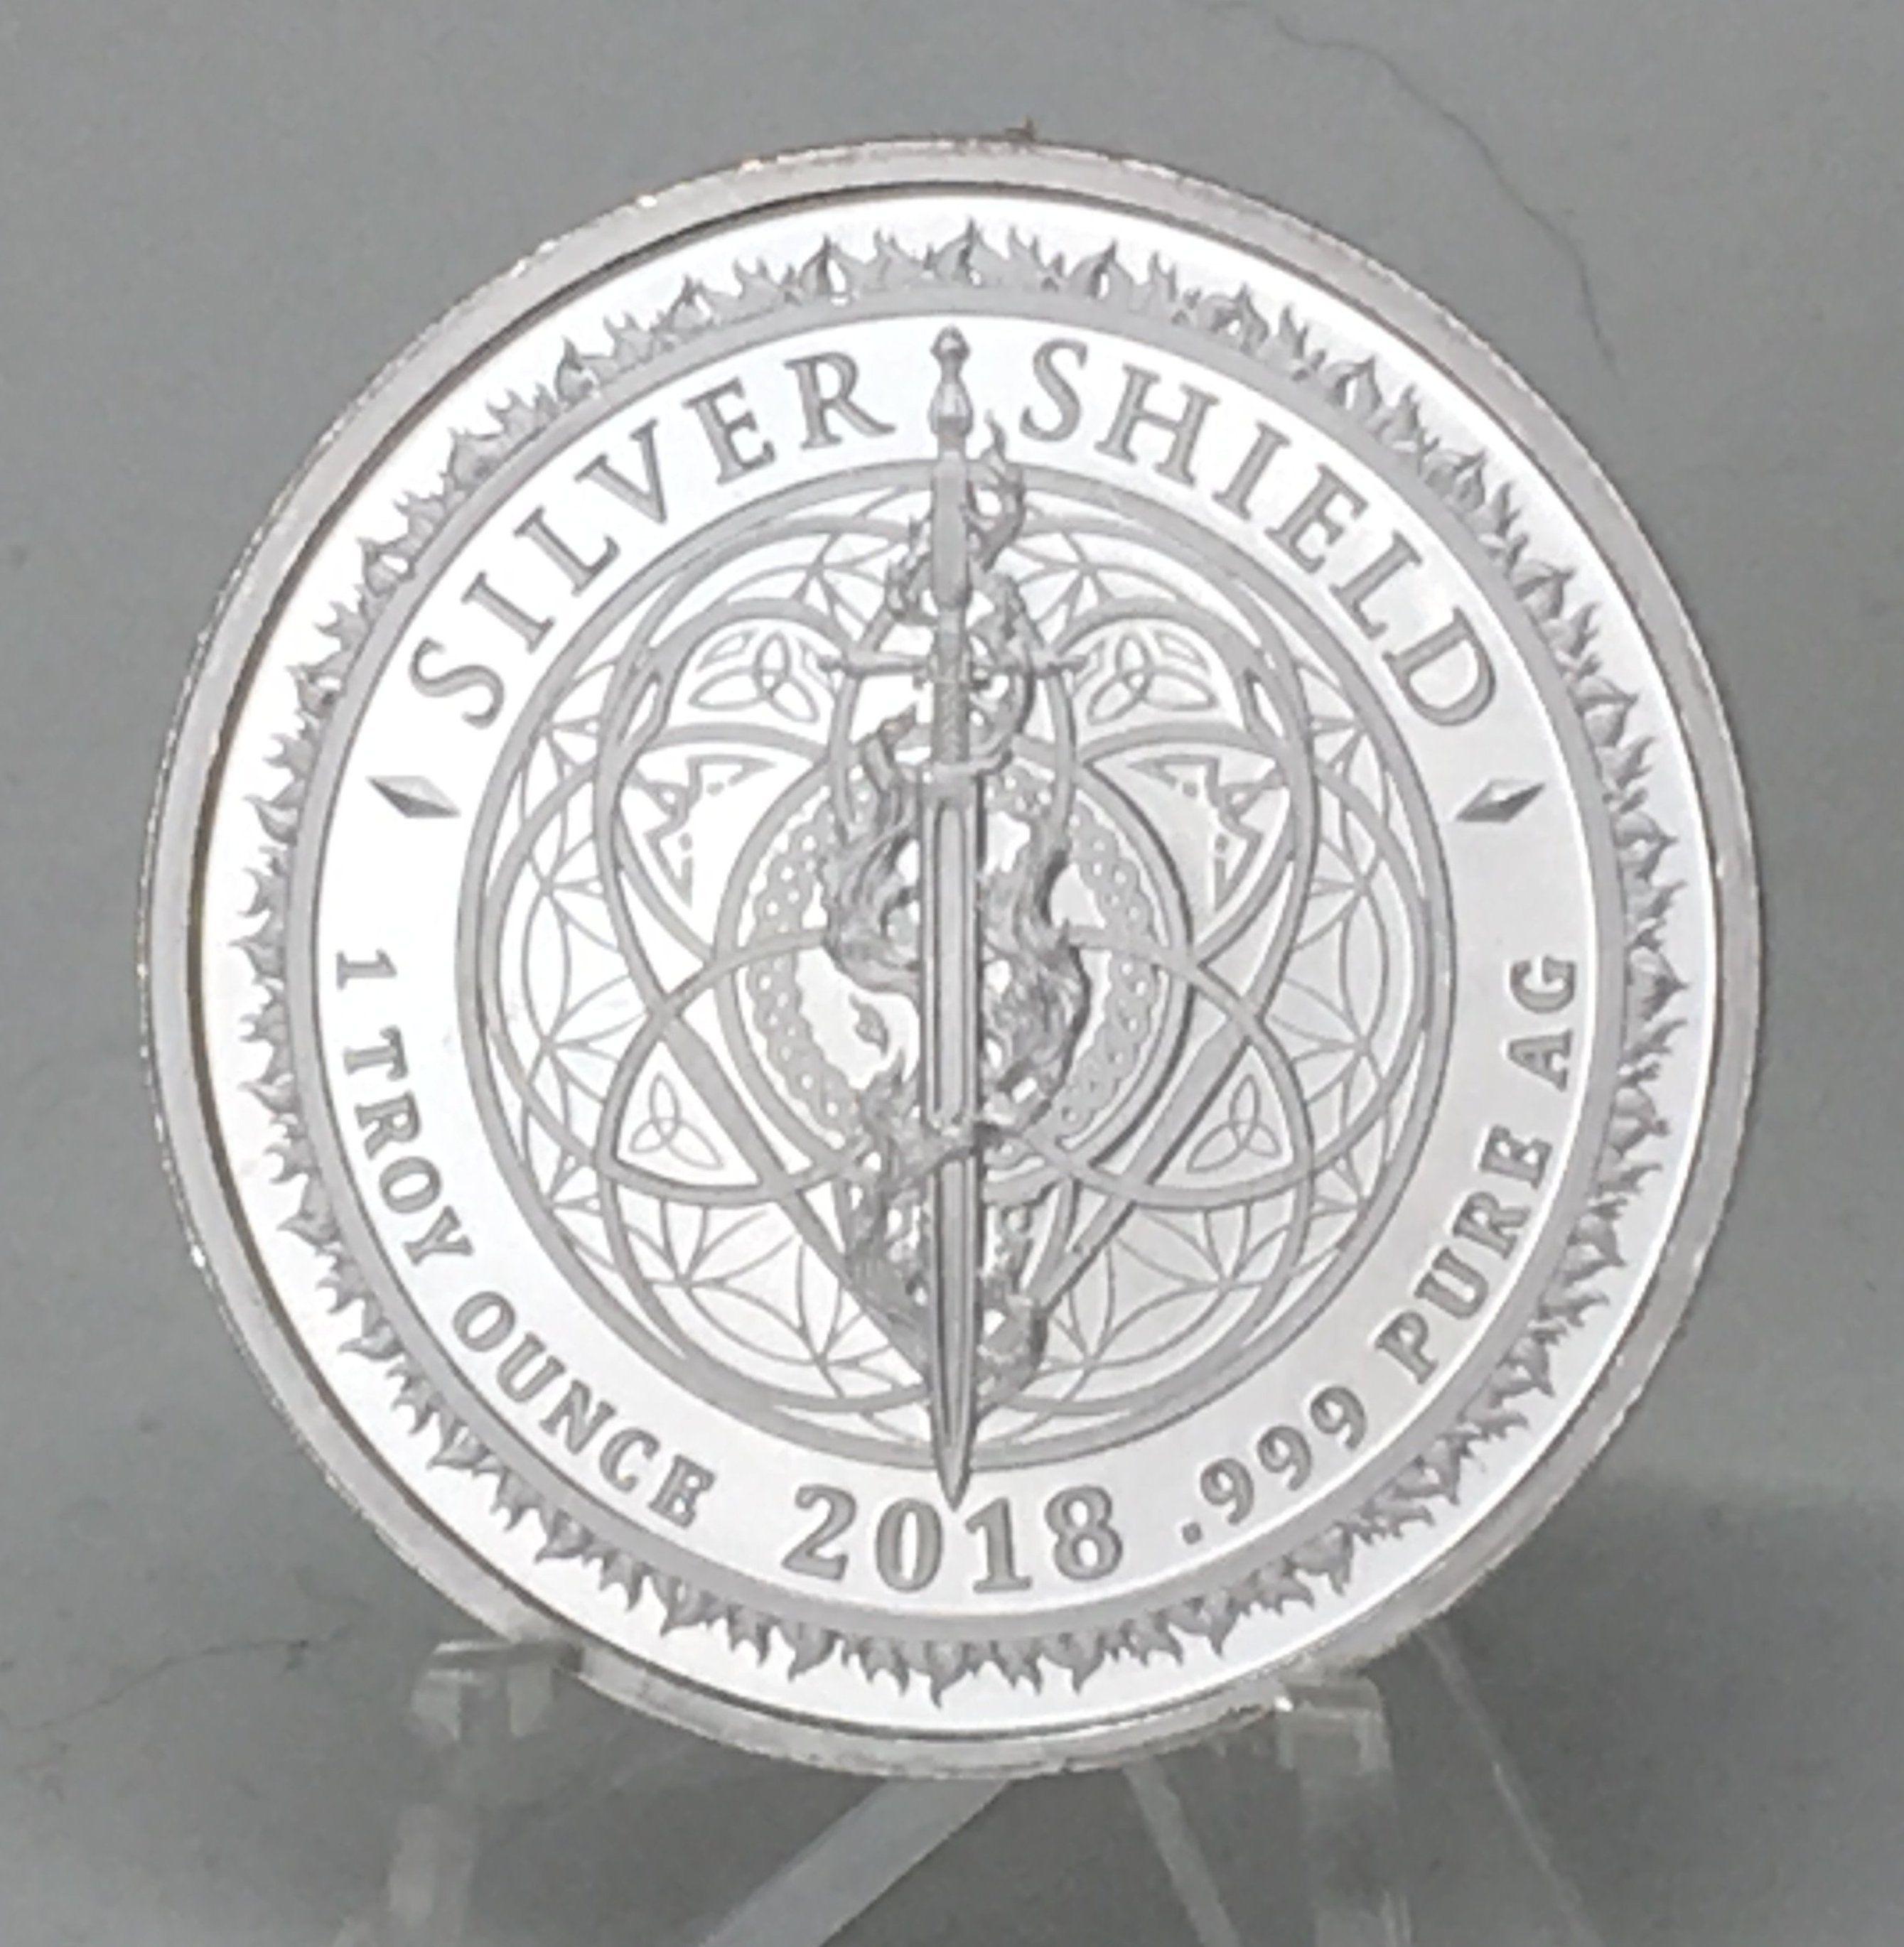 Black and Silver Shield Logo - Be Your King by Silver Shield, Mini Mintage 1 oz .999